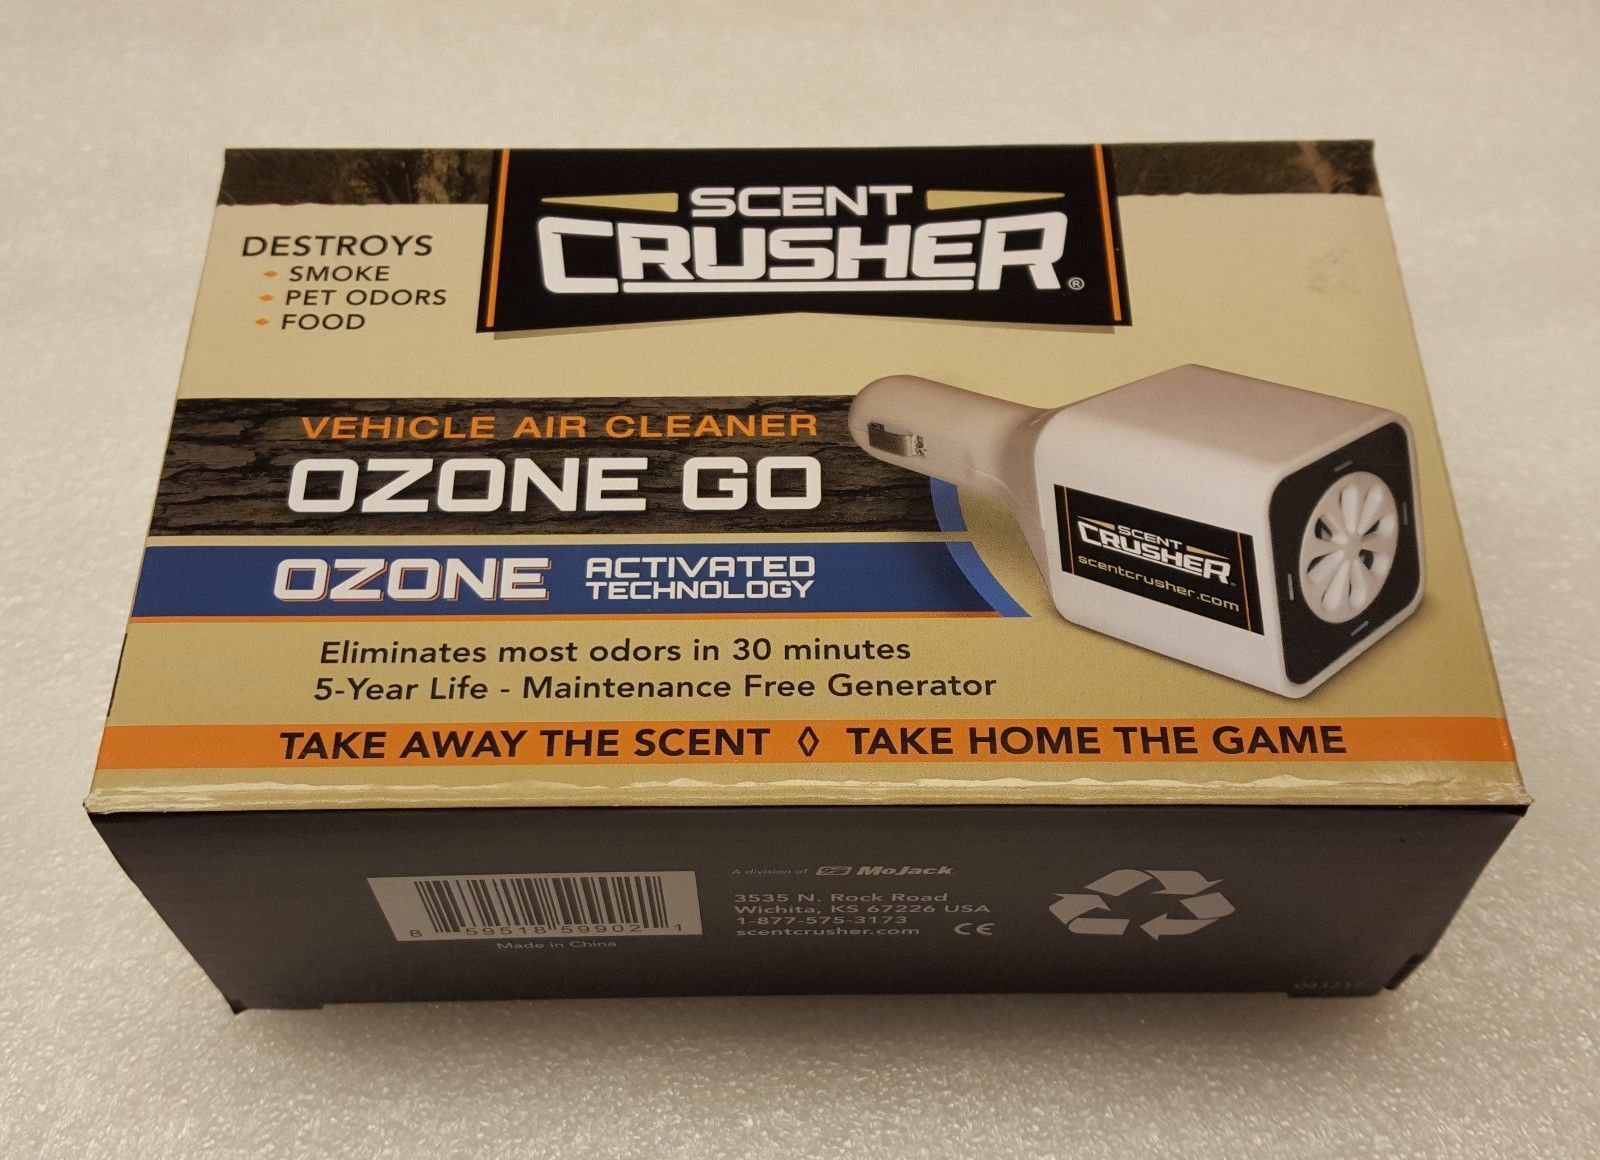 Scent Crusher Ozone Go Vehicle Clean Air Scent Elimination Plug-in Unit - 59902